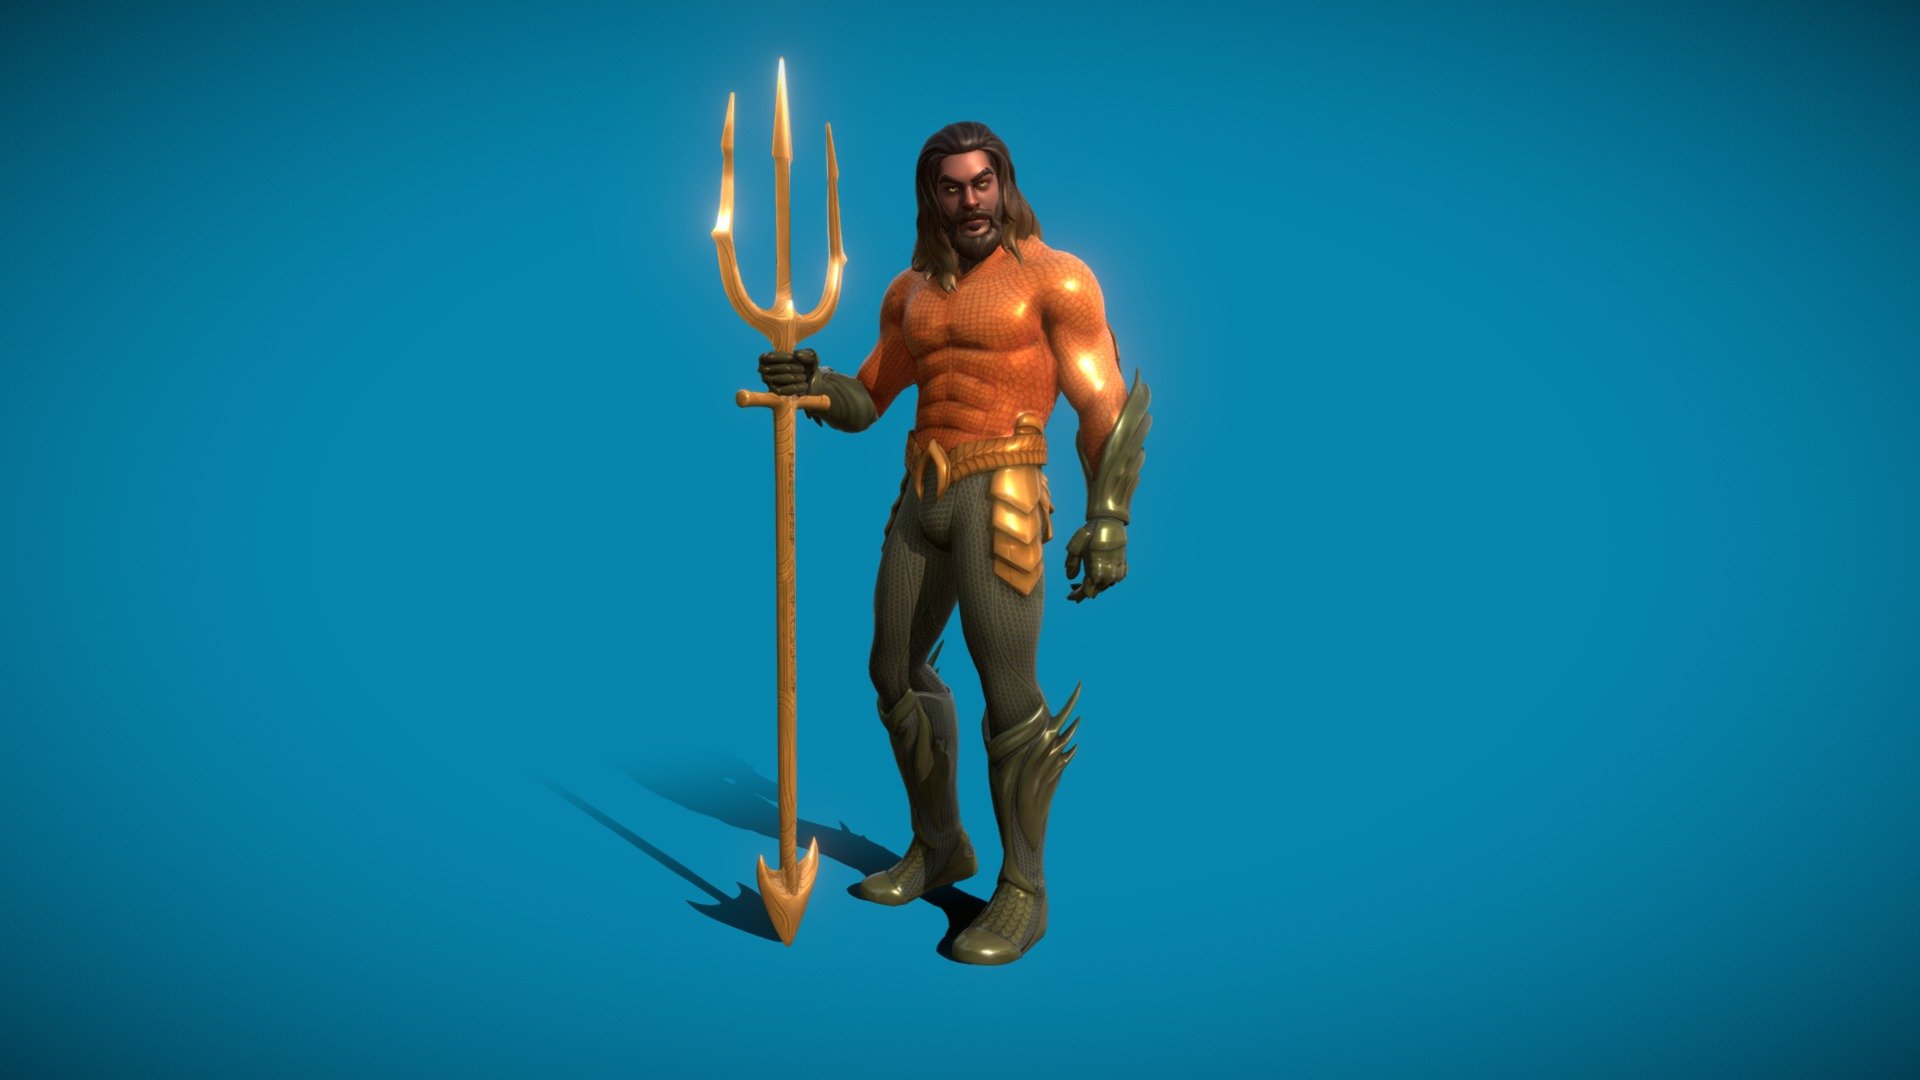 Enjoy the Aquaman skin from the Fortnite Chapter 2 Season 3 battle pass! And it would be appreticated if you could check out my YT https://www.youtube.com/channel/UCKa3qvqhJFkKAeoLpqZtlJw?view_as=subscriber - Fortnite Aquaman | Chapter 2 Season 3 BP Skin | - Download Free 3D model by SketchSupreme 3d model